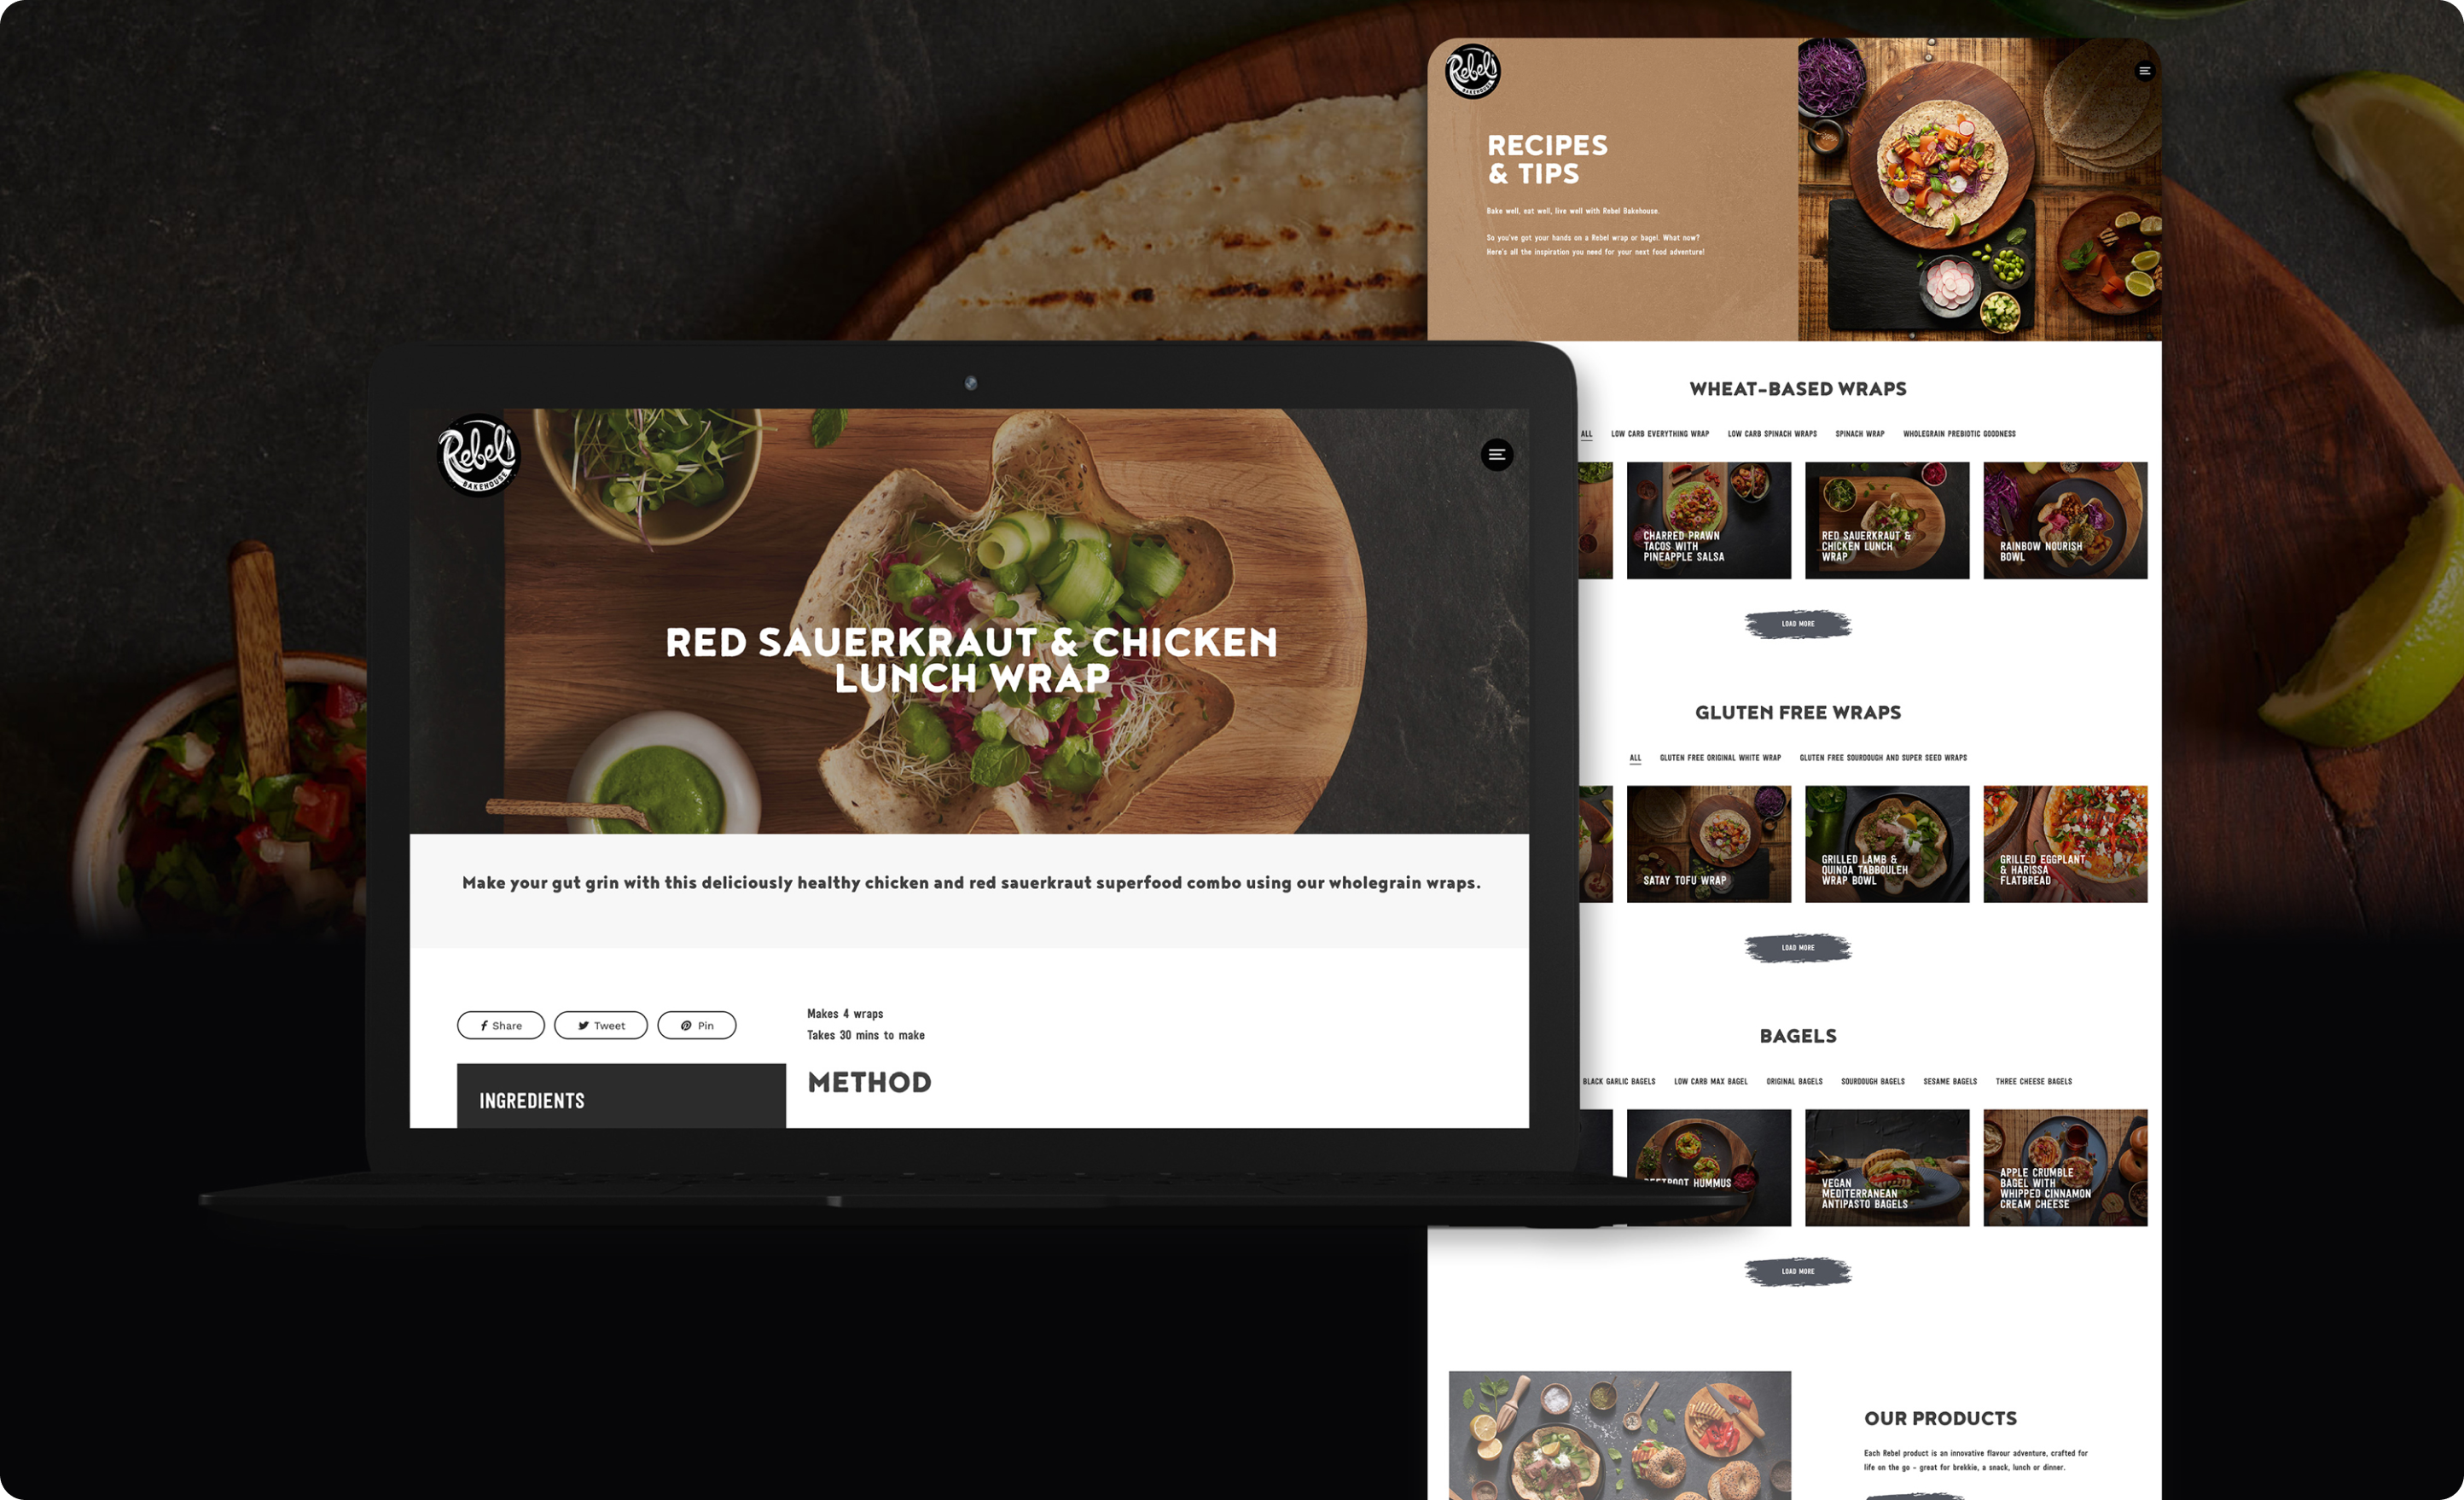 Webpages highlighting recipes used with Rebel Bakehouse products.